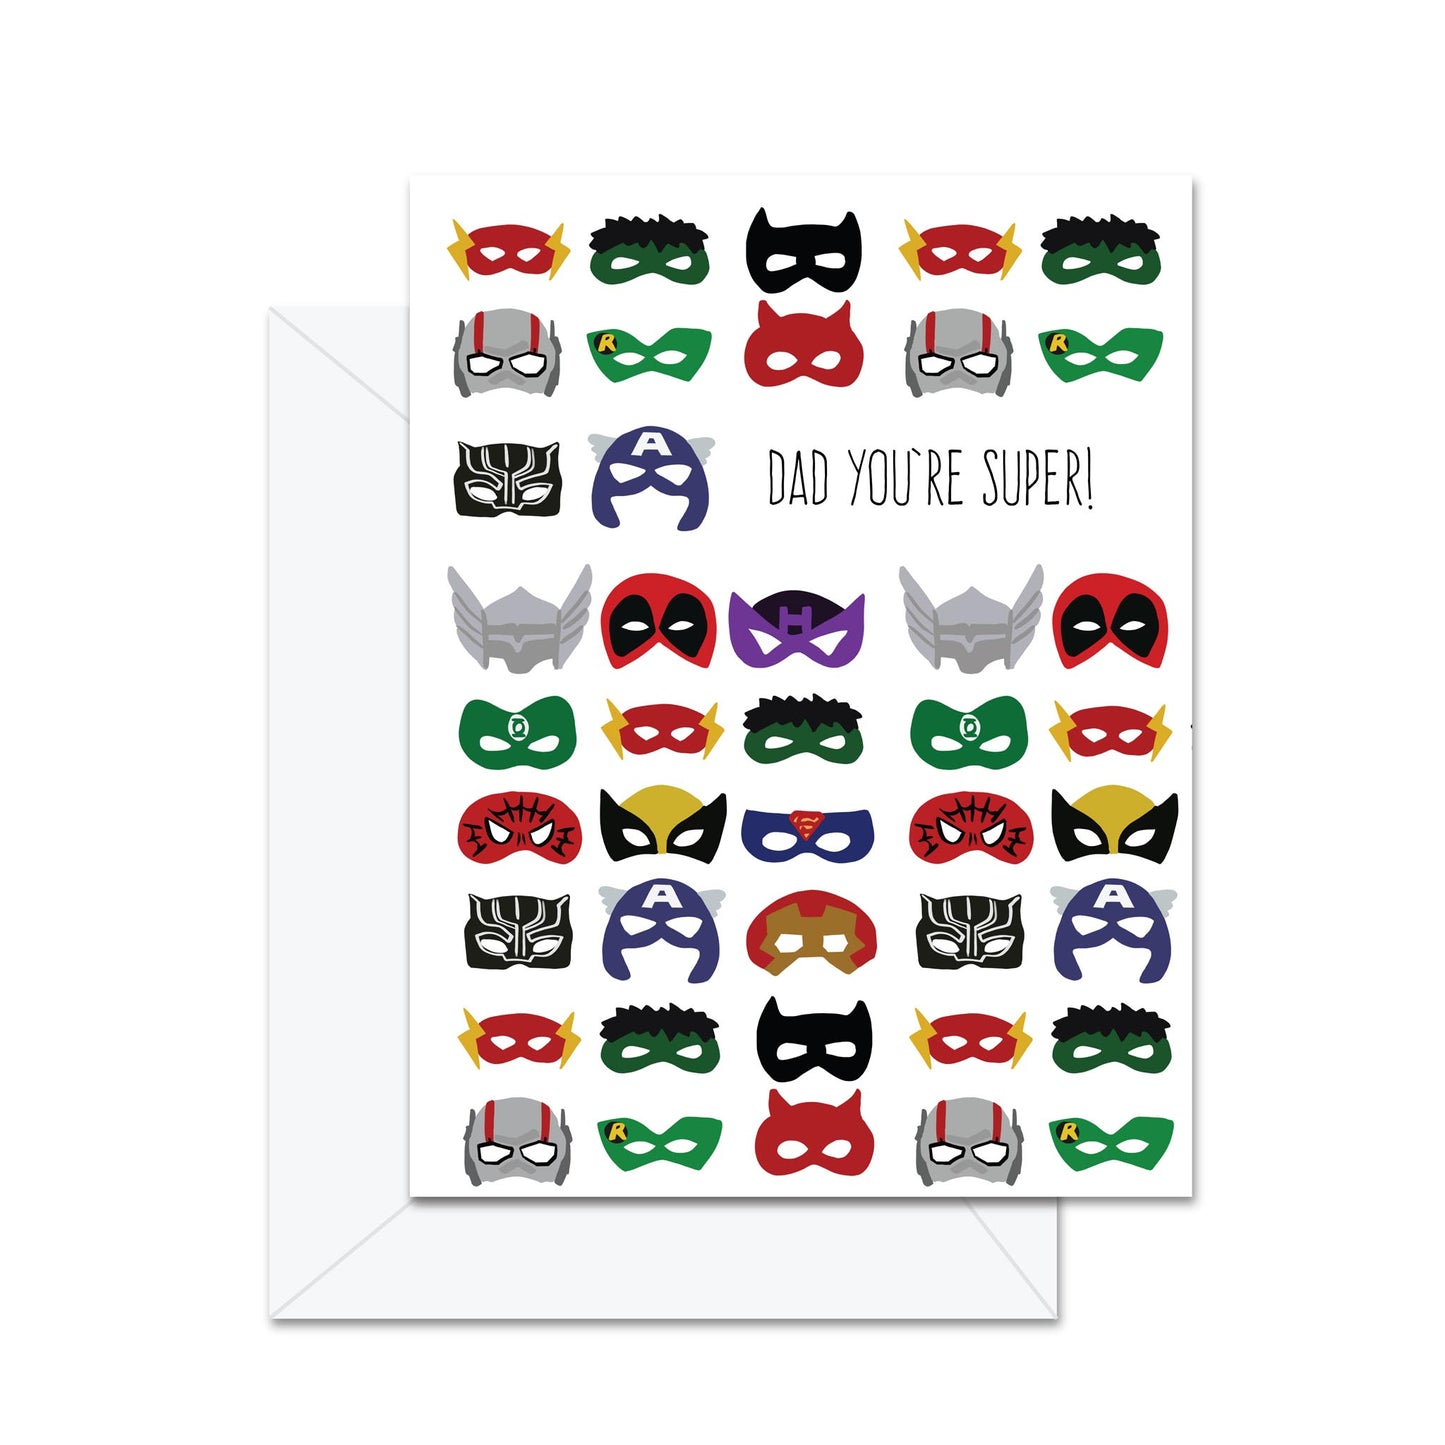 Dad, You Are Super! - Greeting Card